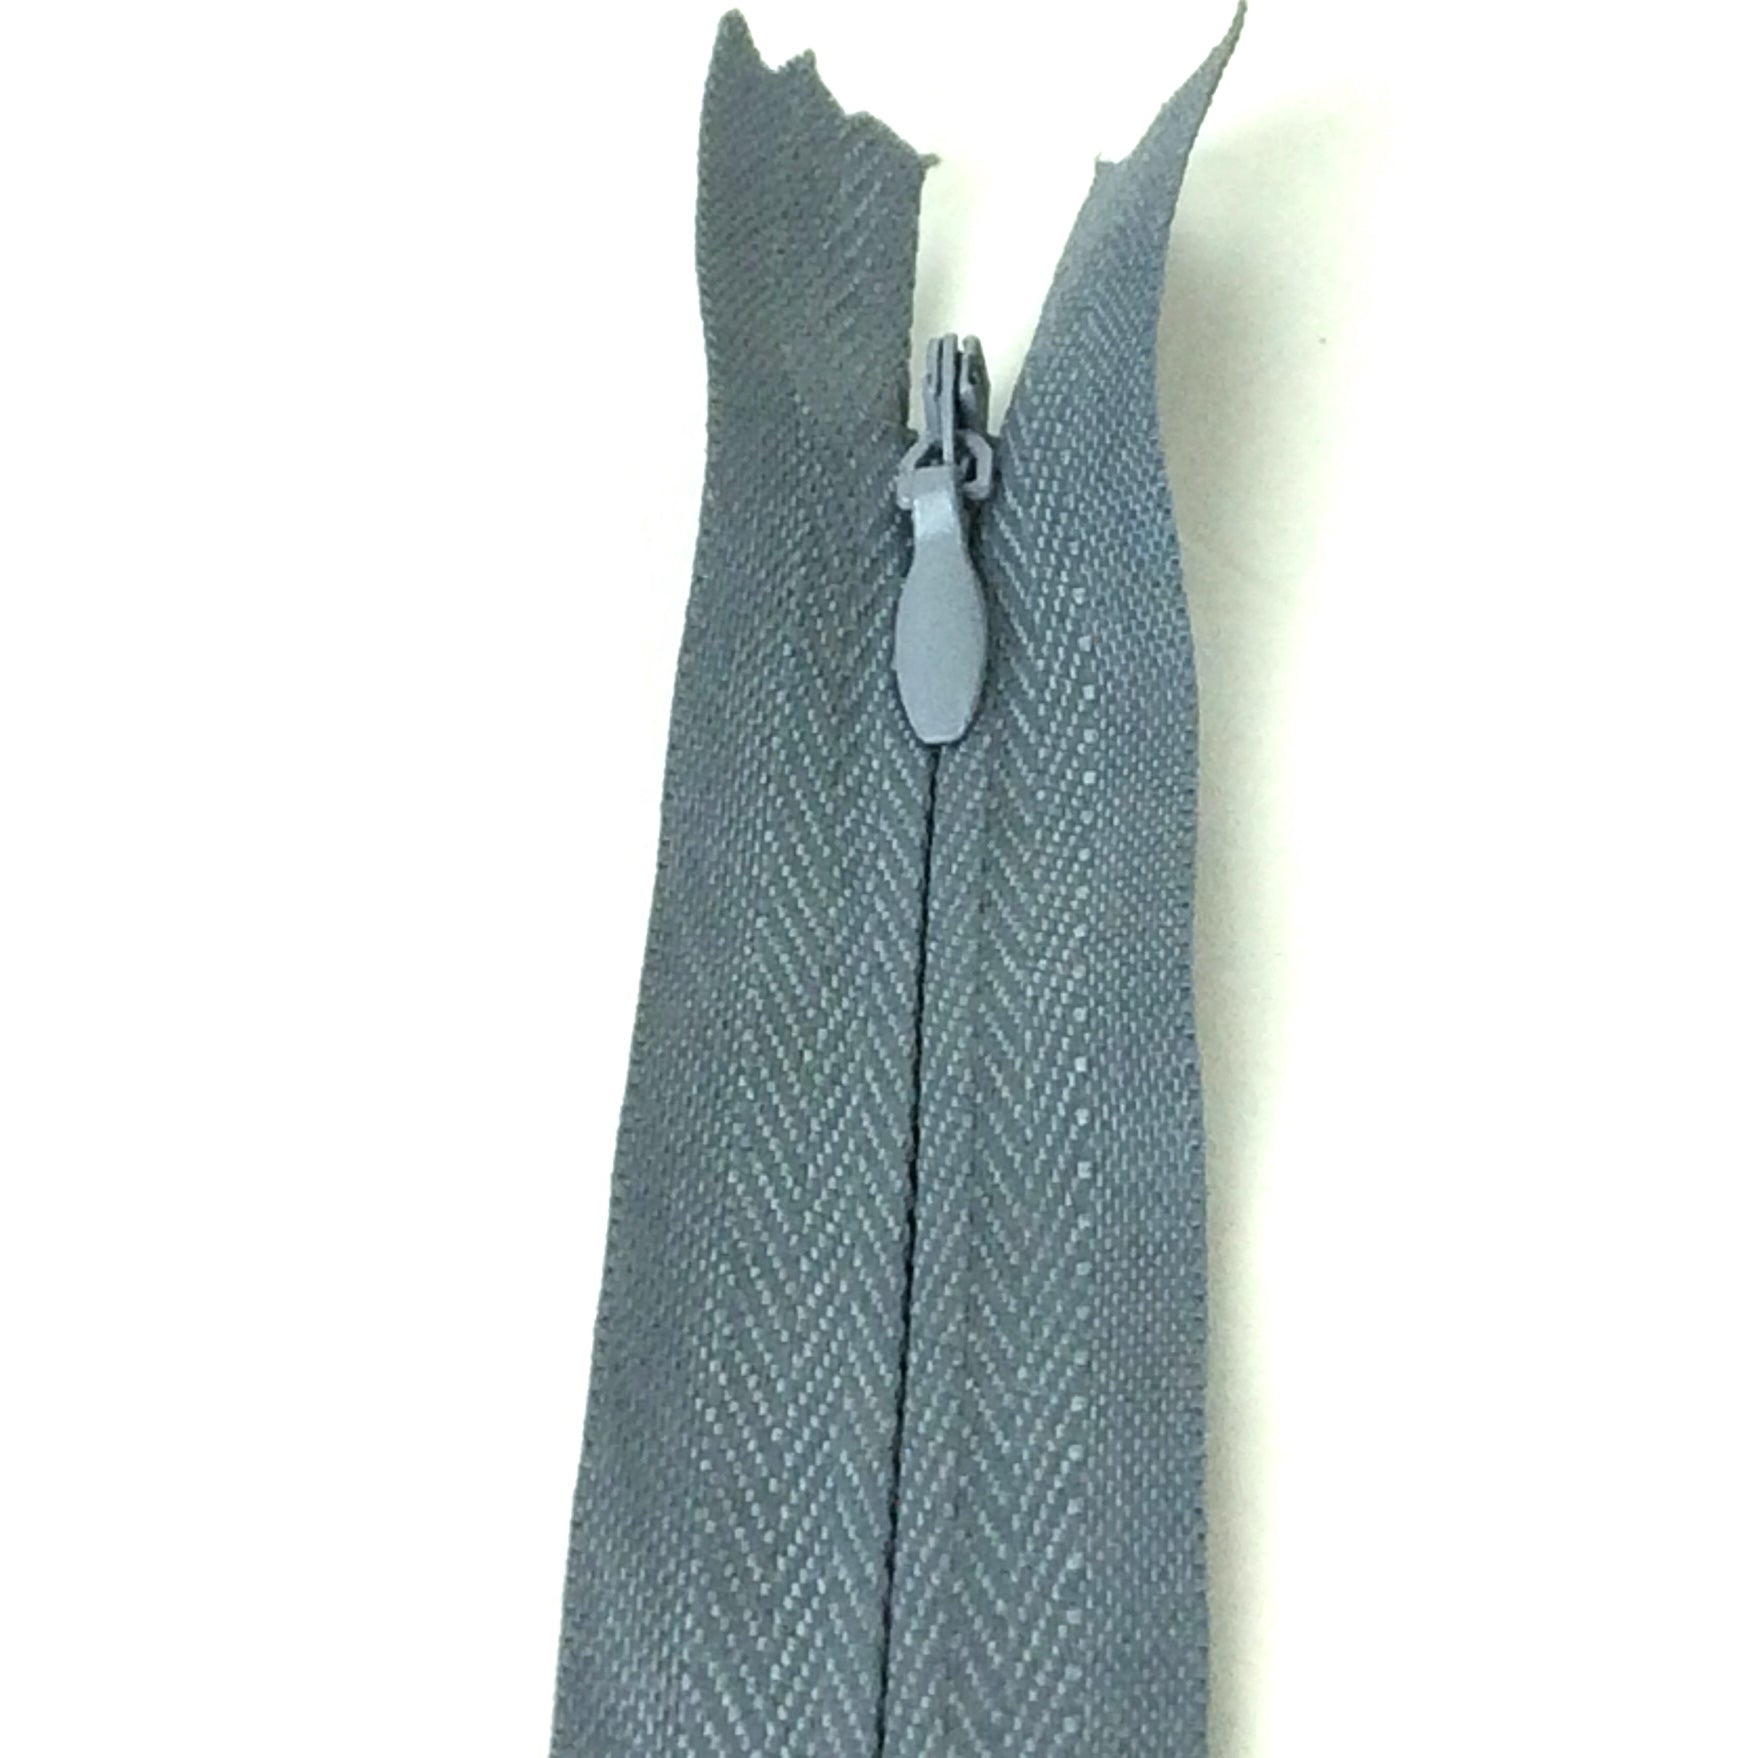 Photo of steel grey invisible or concealed zips available in many different colours and sizes. Great for achieving a professional finish in your products. Invisible zippers are perfect for dressmaking, cushions, crafts, etc., where you don't want your zipper showing. Installing them can be tricky without the right foot on your machine; a normal zipper foot is for installing standard zippers, while you will need an invisible zipper foot for a professional result